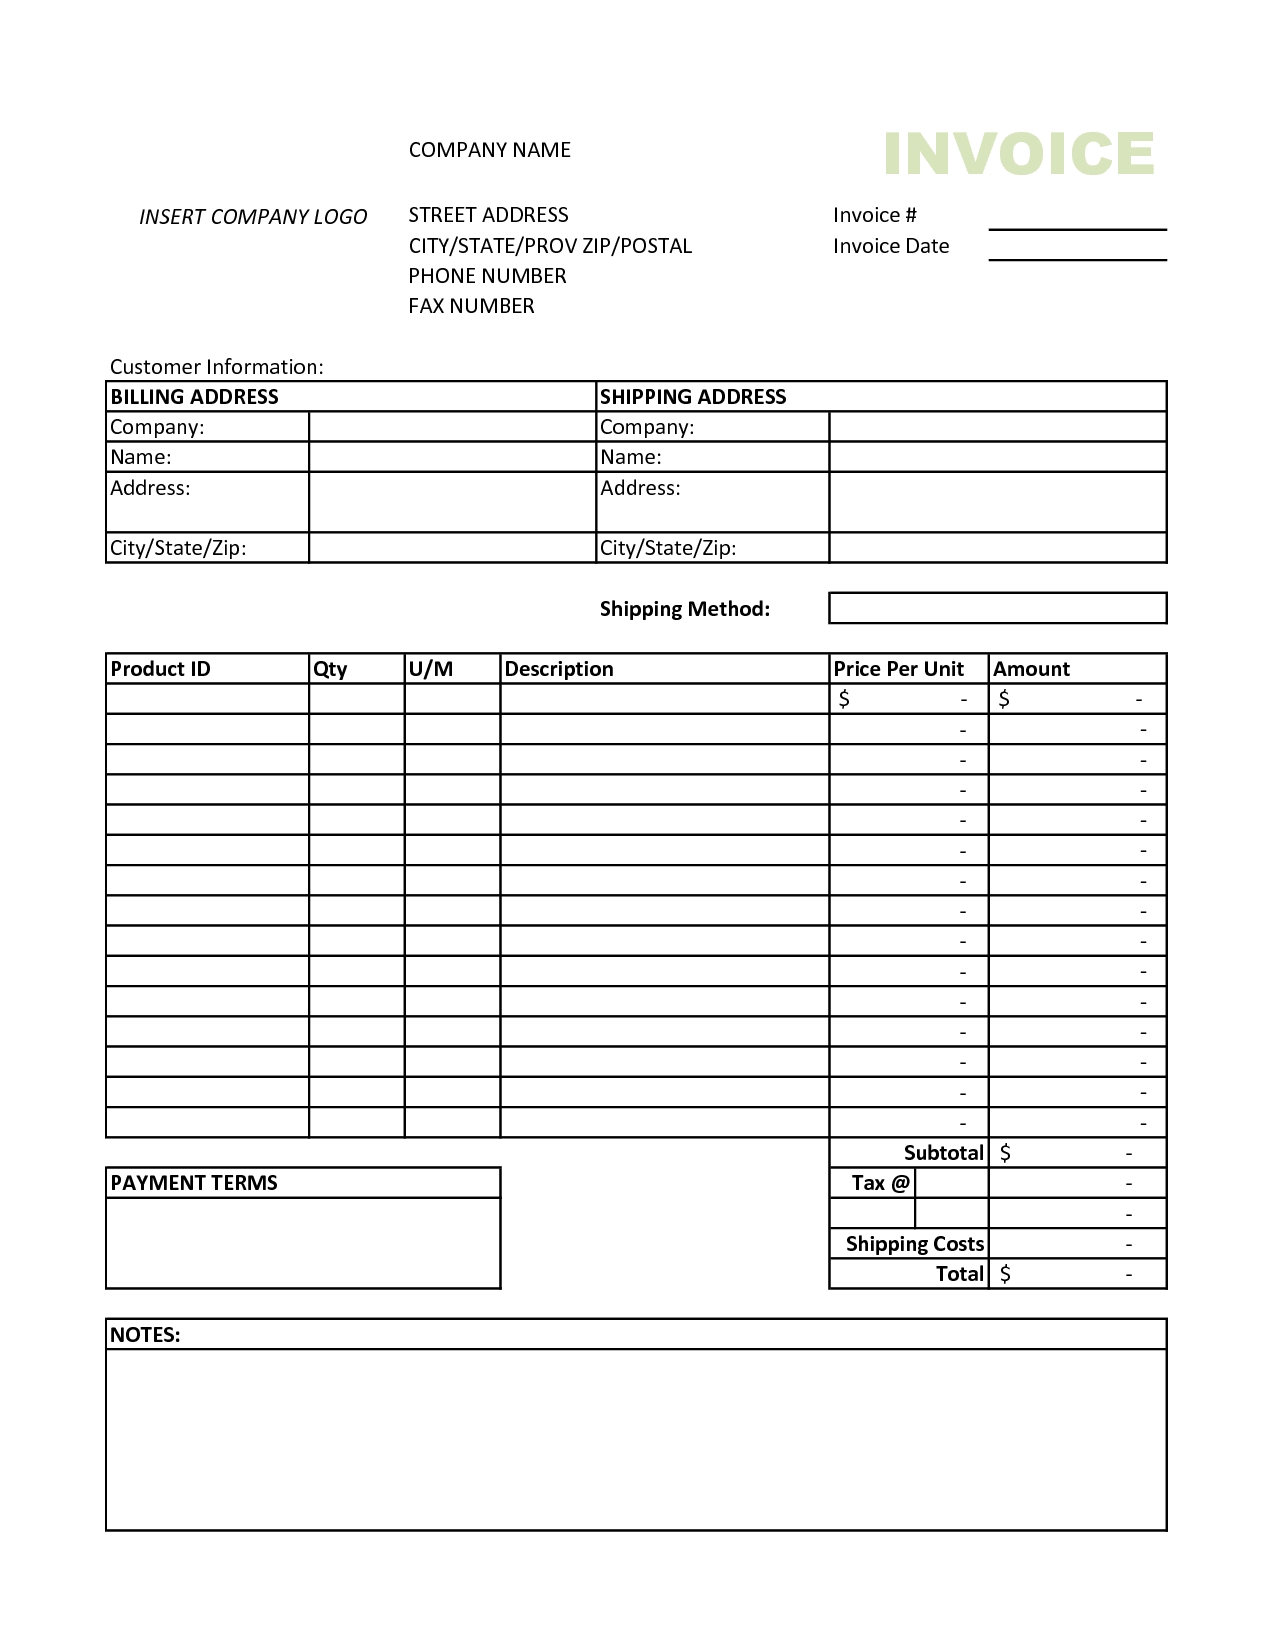 invoice template excel dhuidddynu invoice template for excel 2010